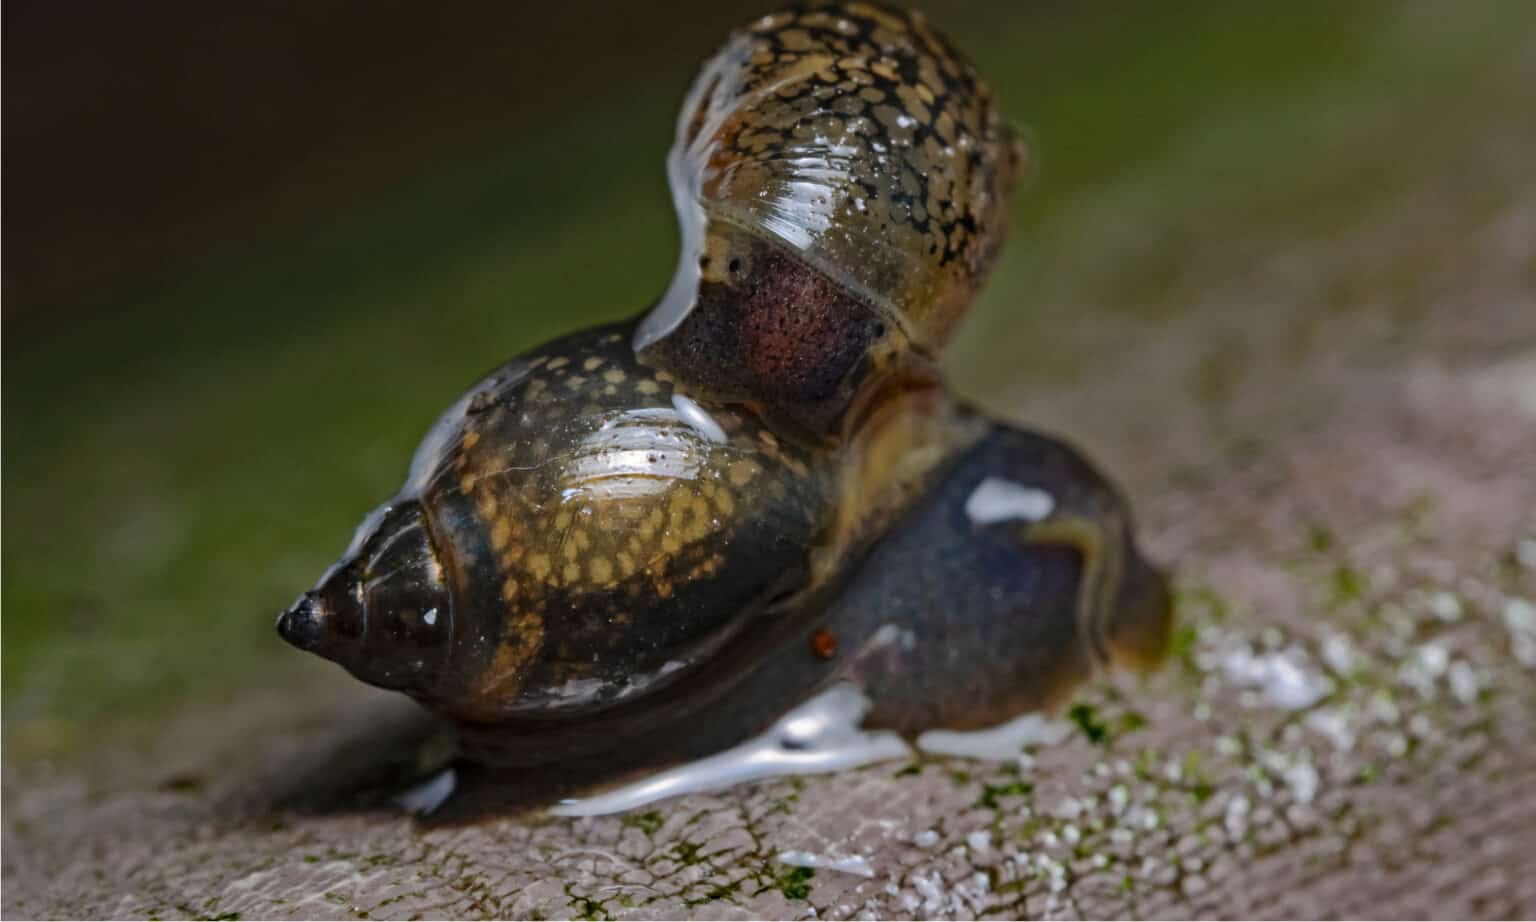 Pond Snail vs Bladder Snail: What are the Differences? - Wiki Point